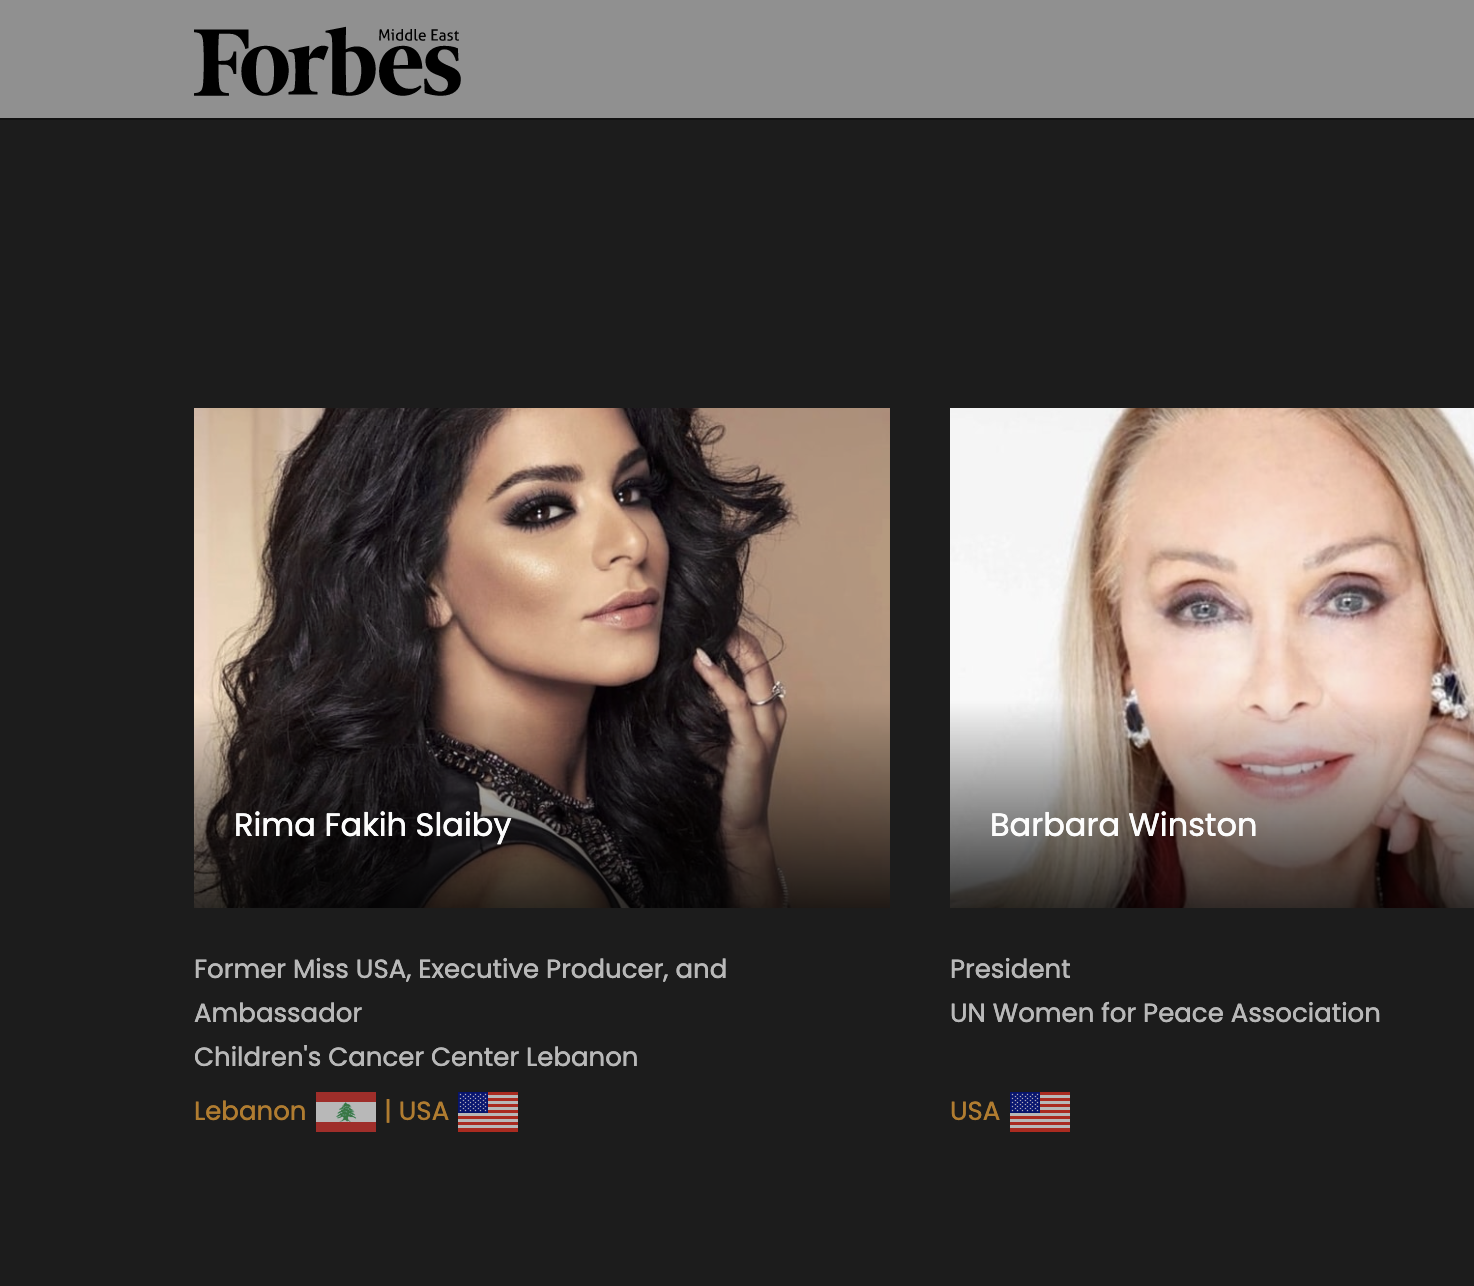 Forbes Middle East: Women in philanthropy and charitable care